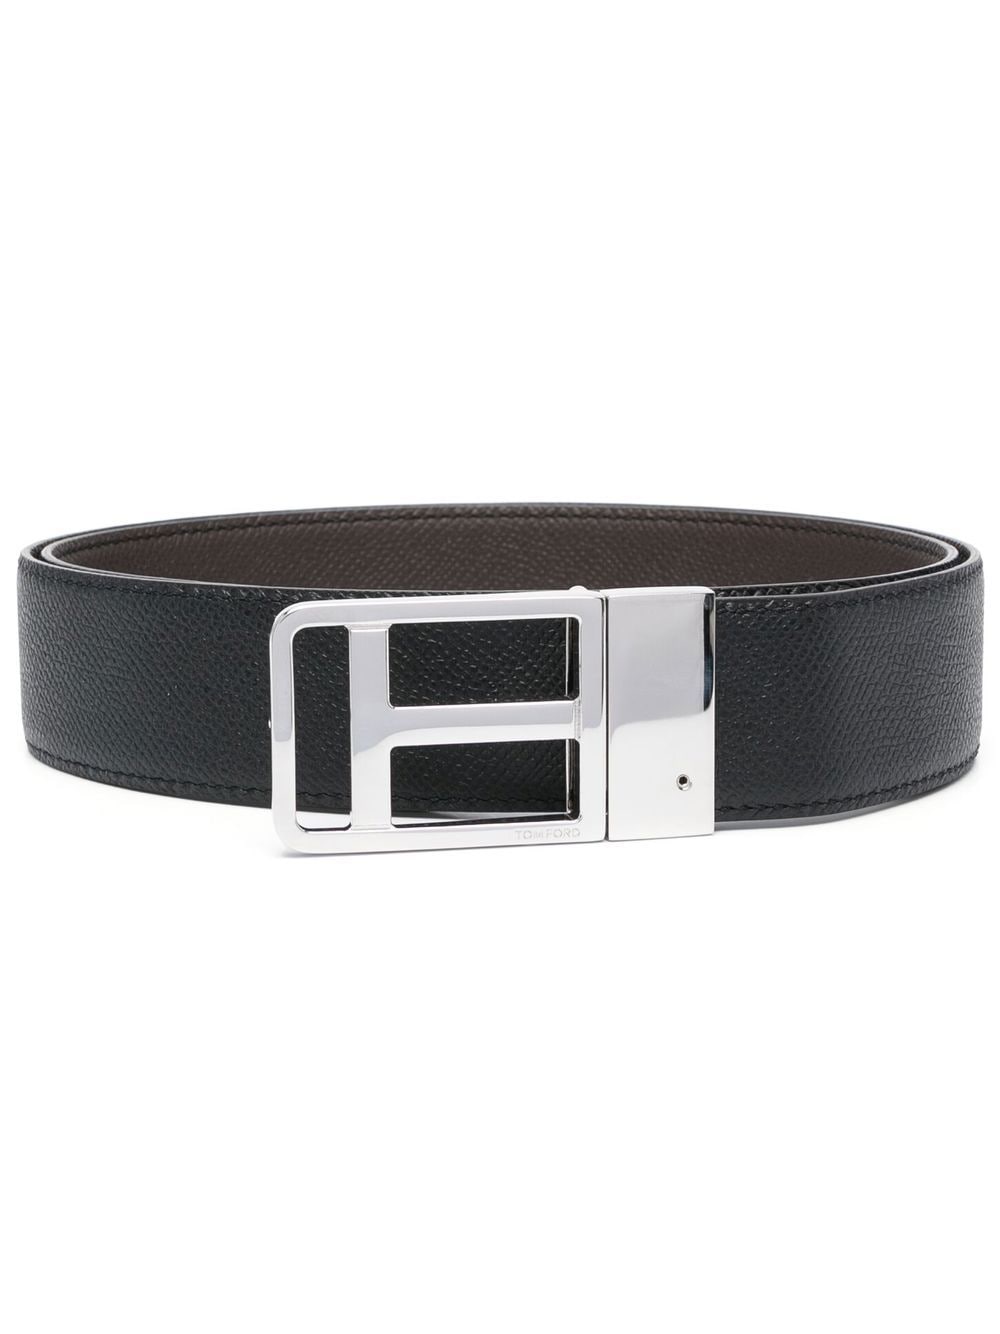 TOM FORD LEATHER BUCKLE BELT